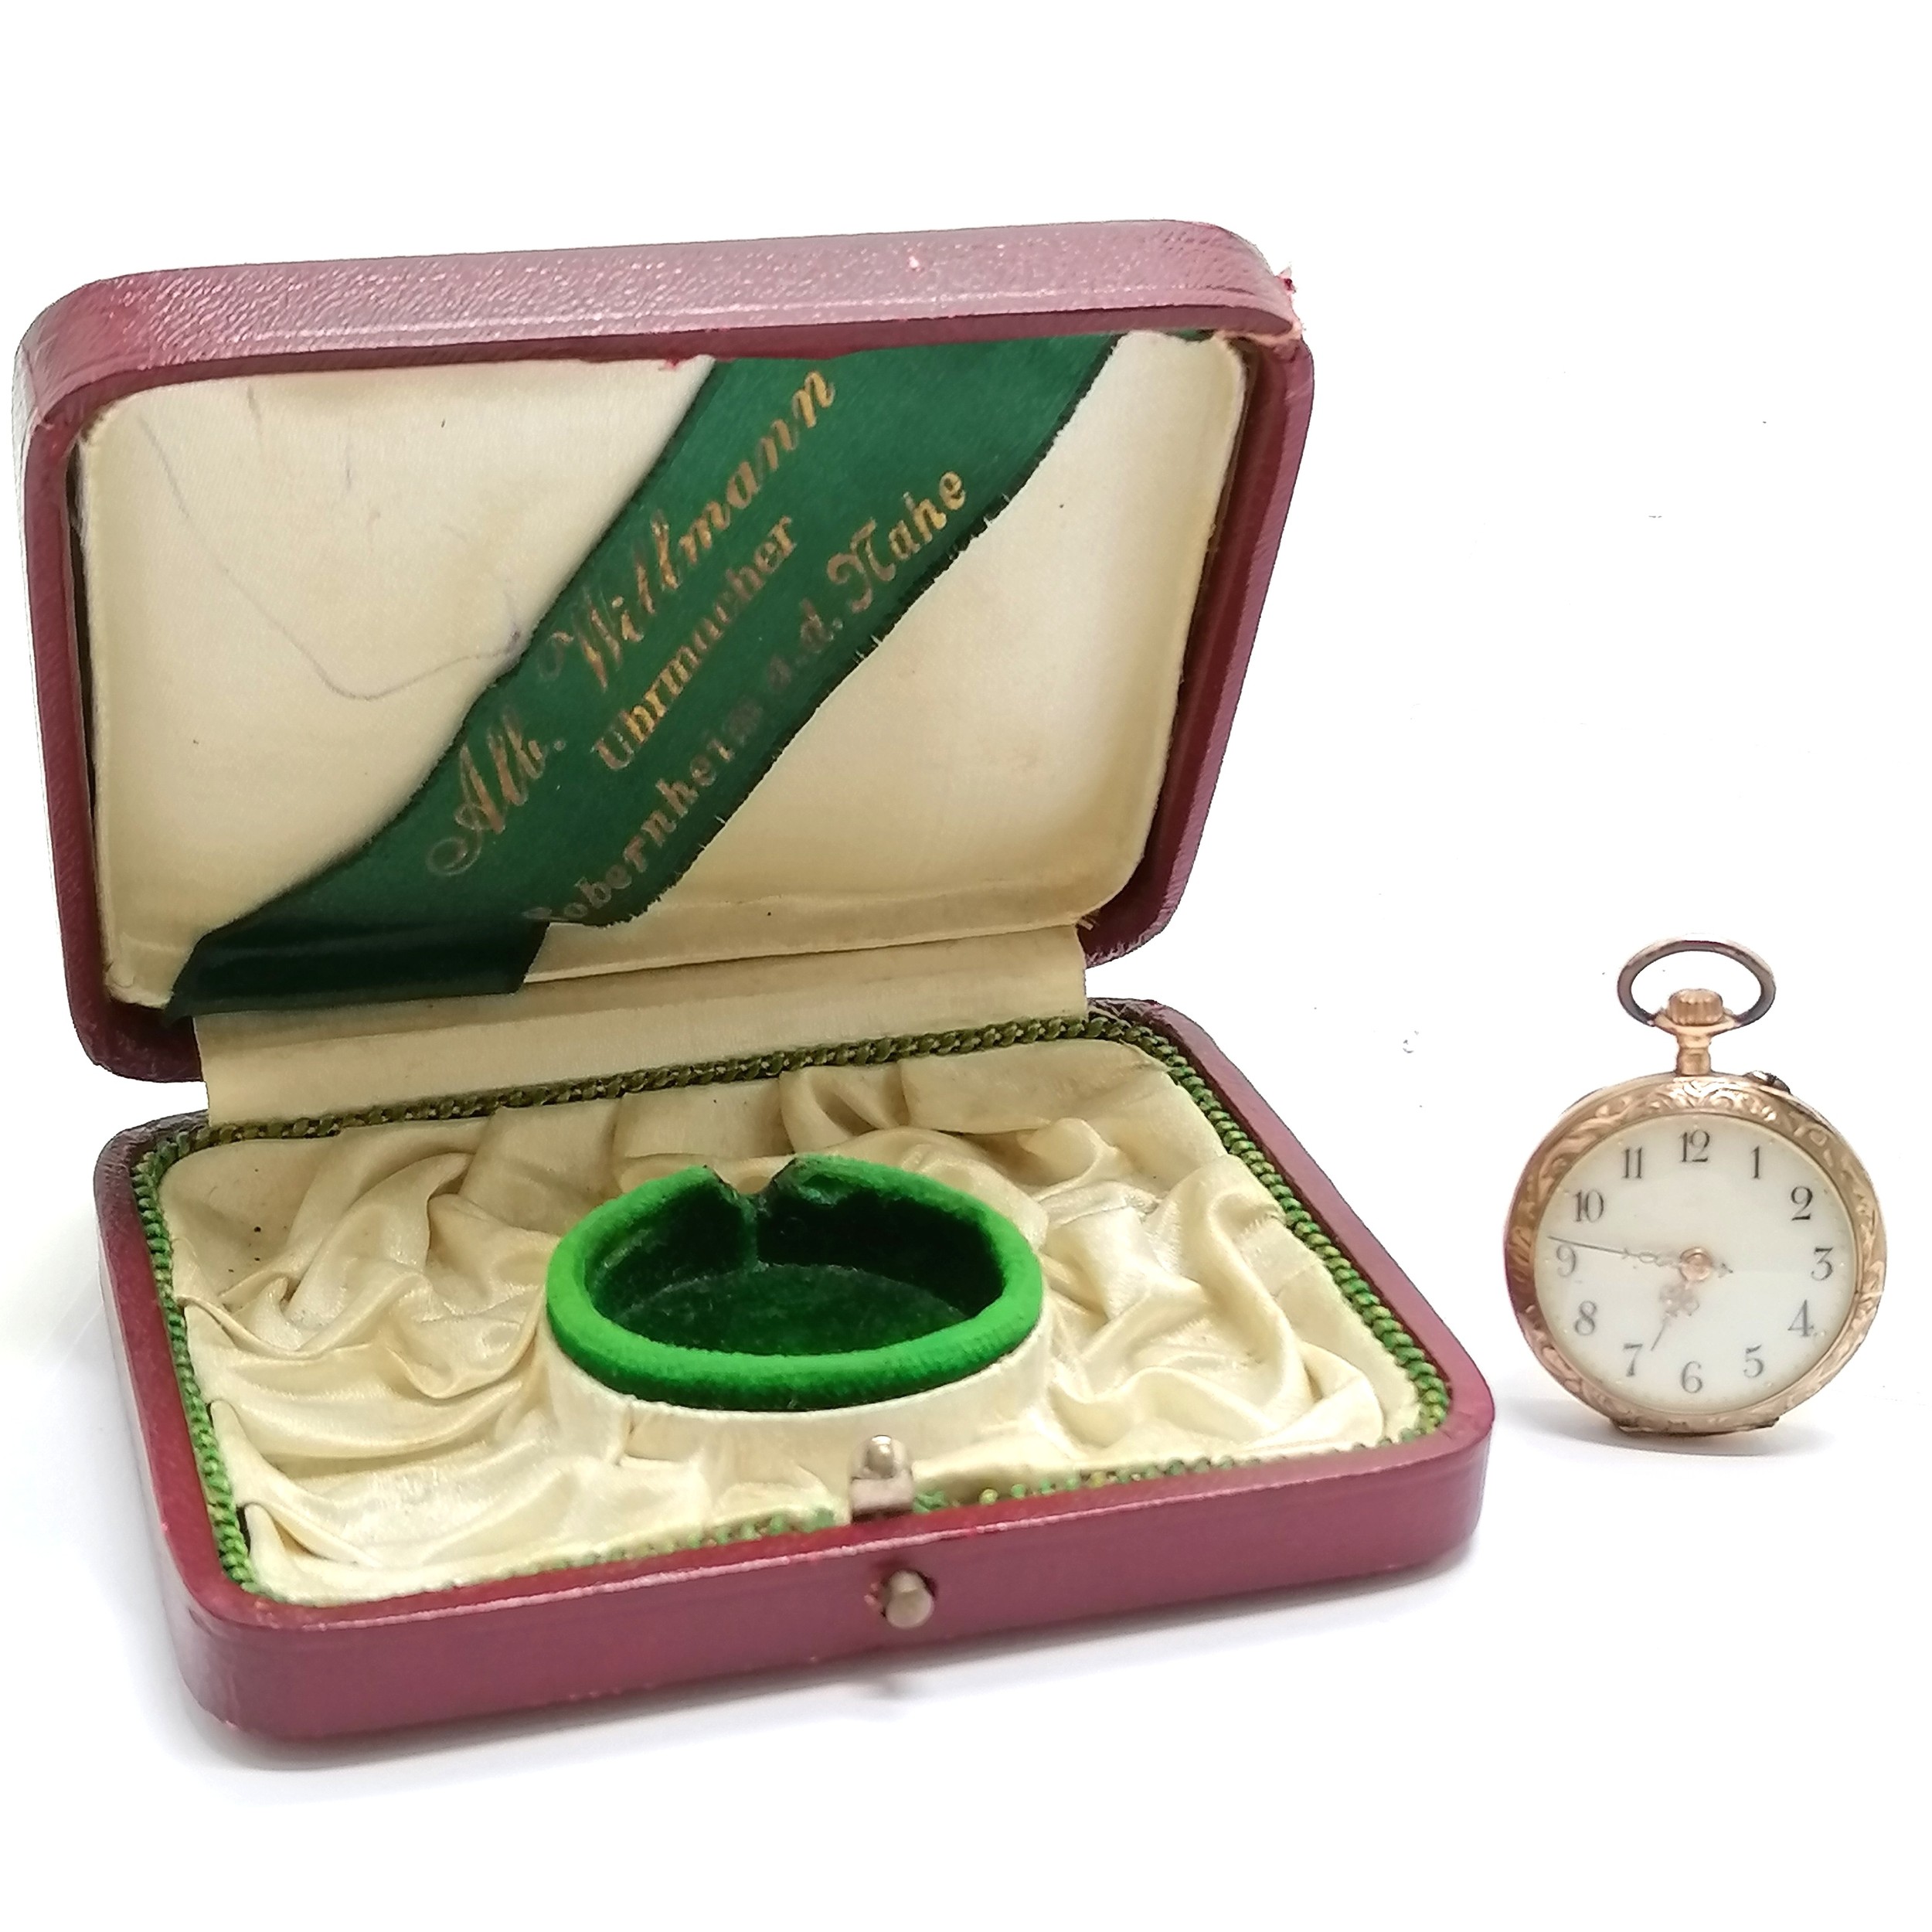 Antique unmarked gold outer cased fob watch - 28mm case in original antique retail box for Alb - Image 2 of 7